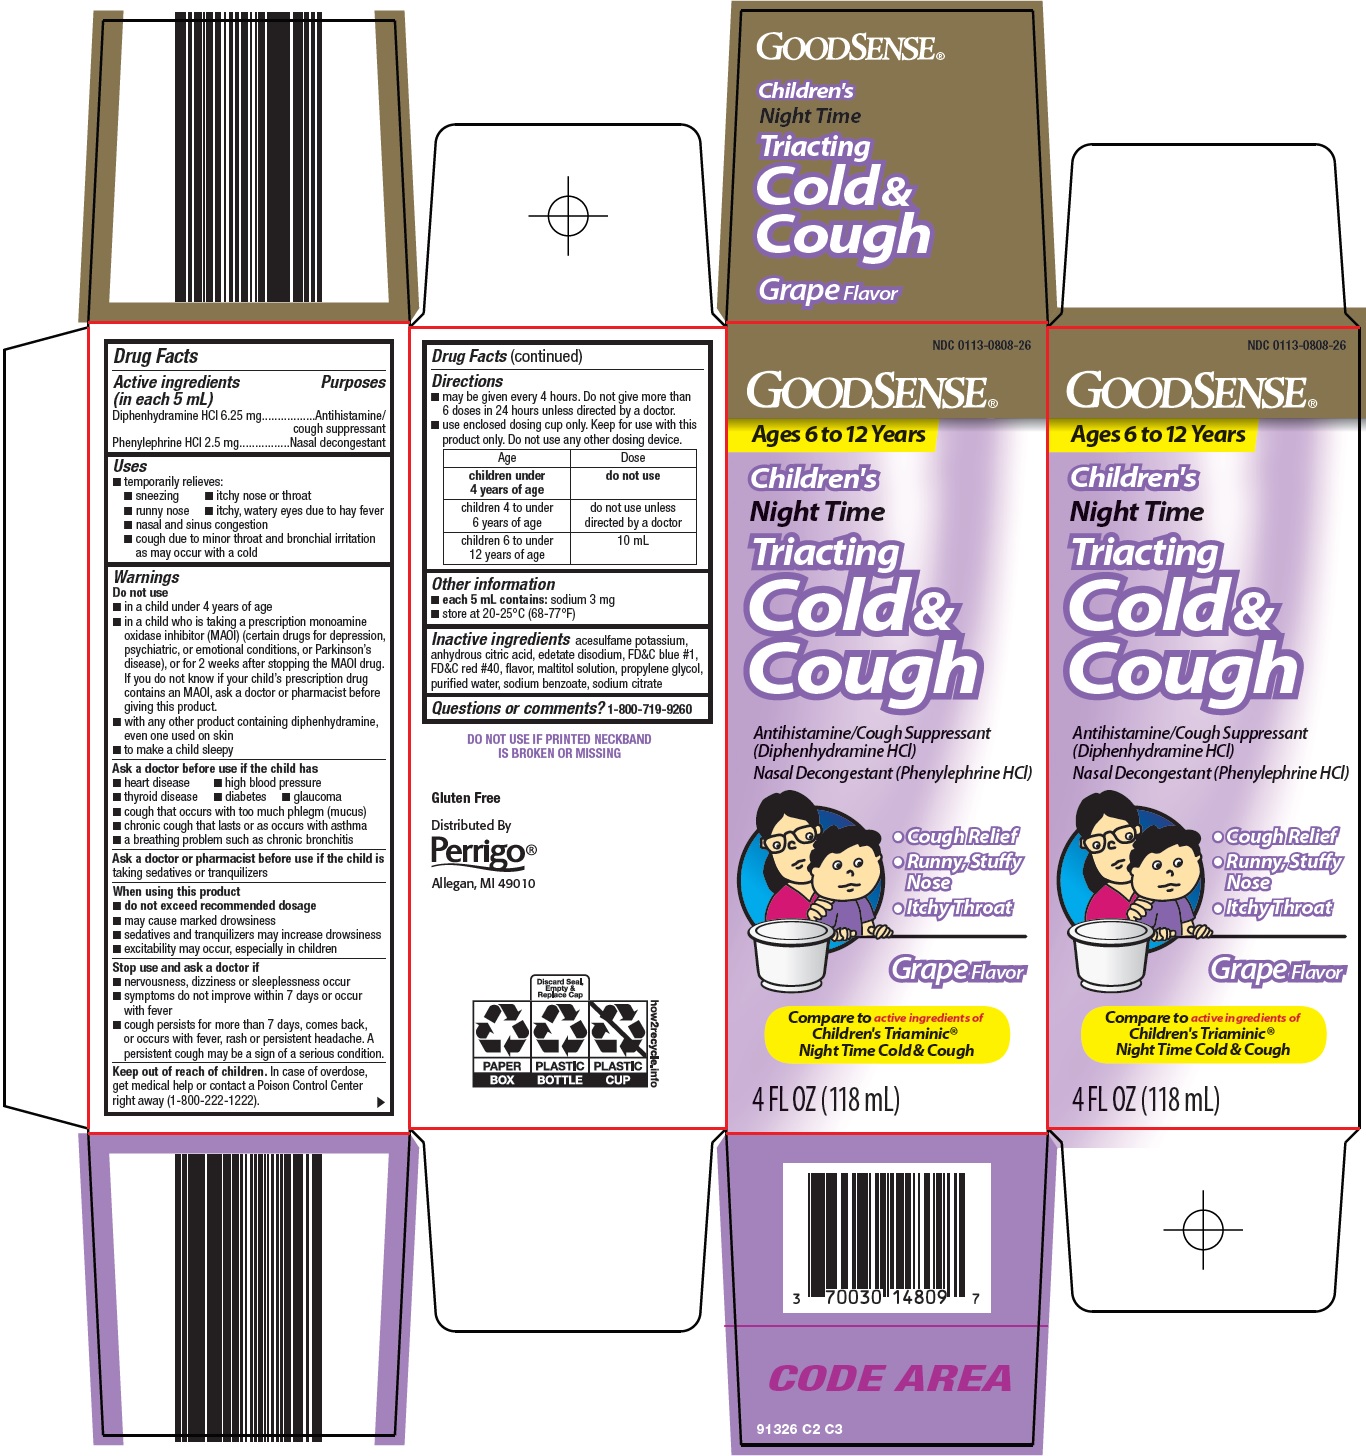 Children's Night Time Triacting Cold & Cough Carton